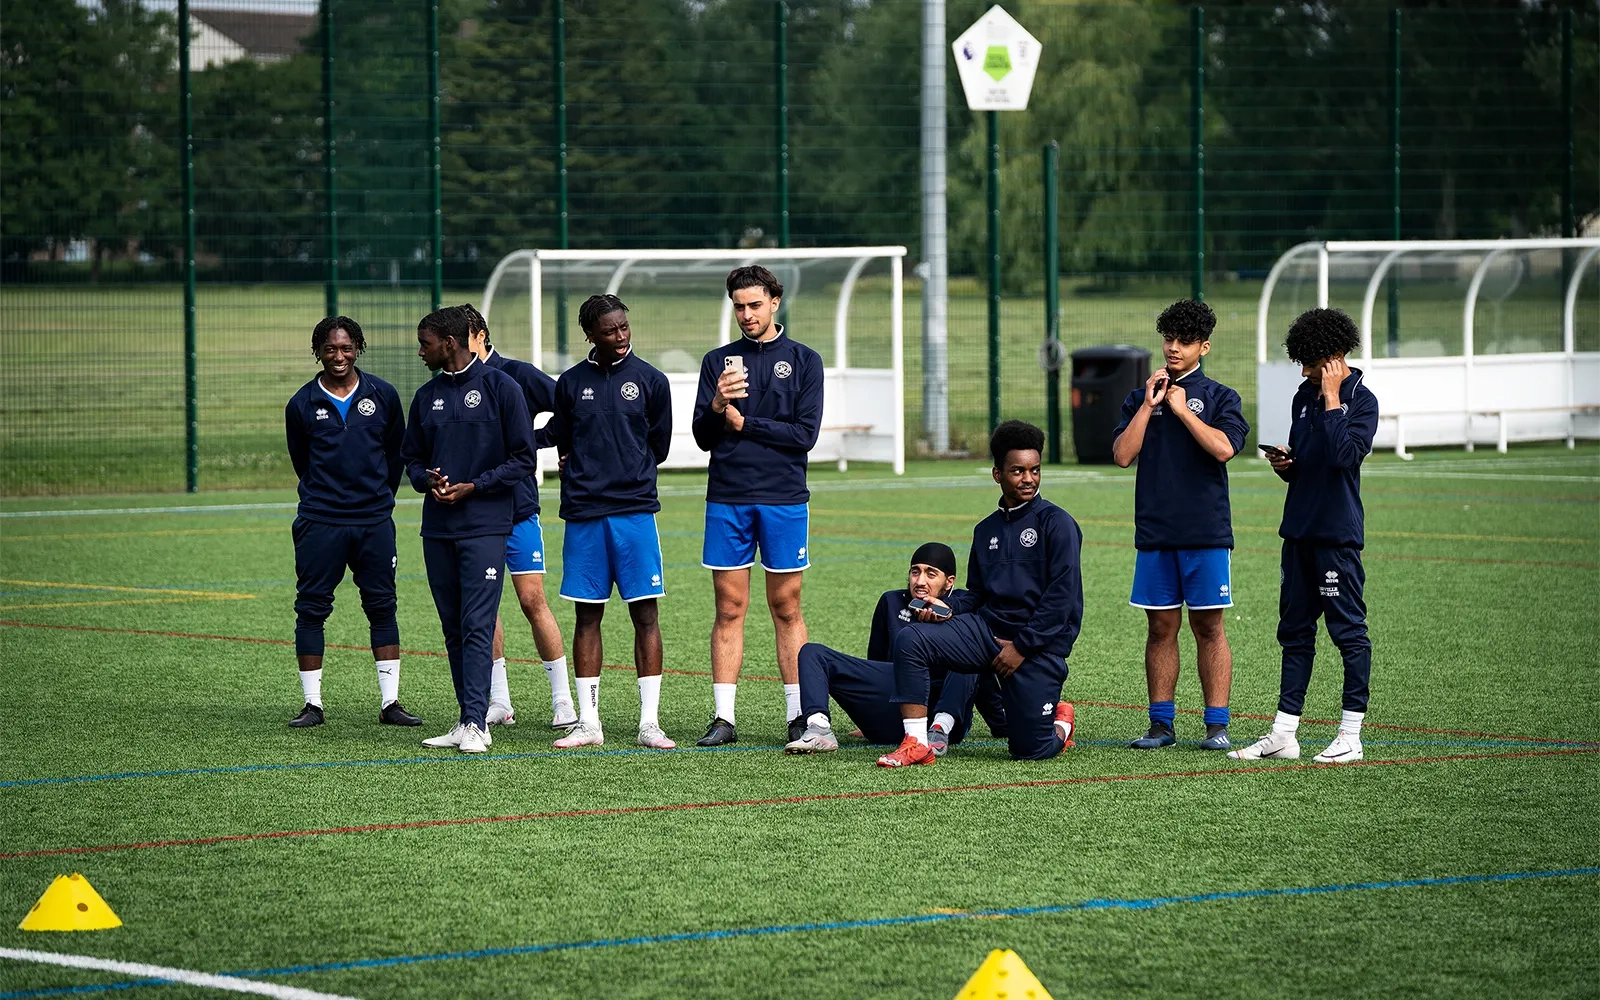 QPR Academy players lined up on the football pitch